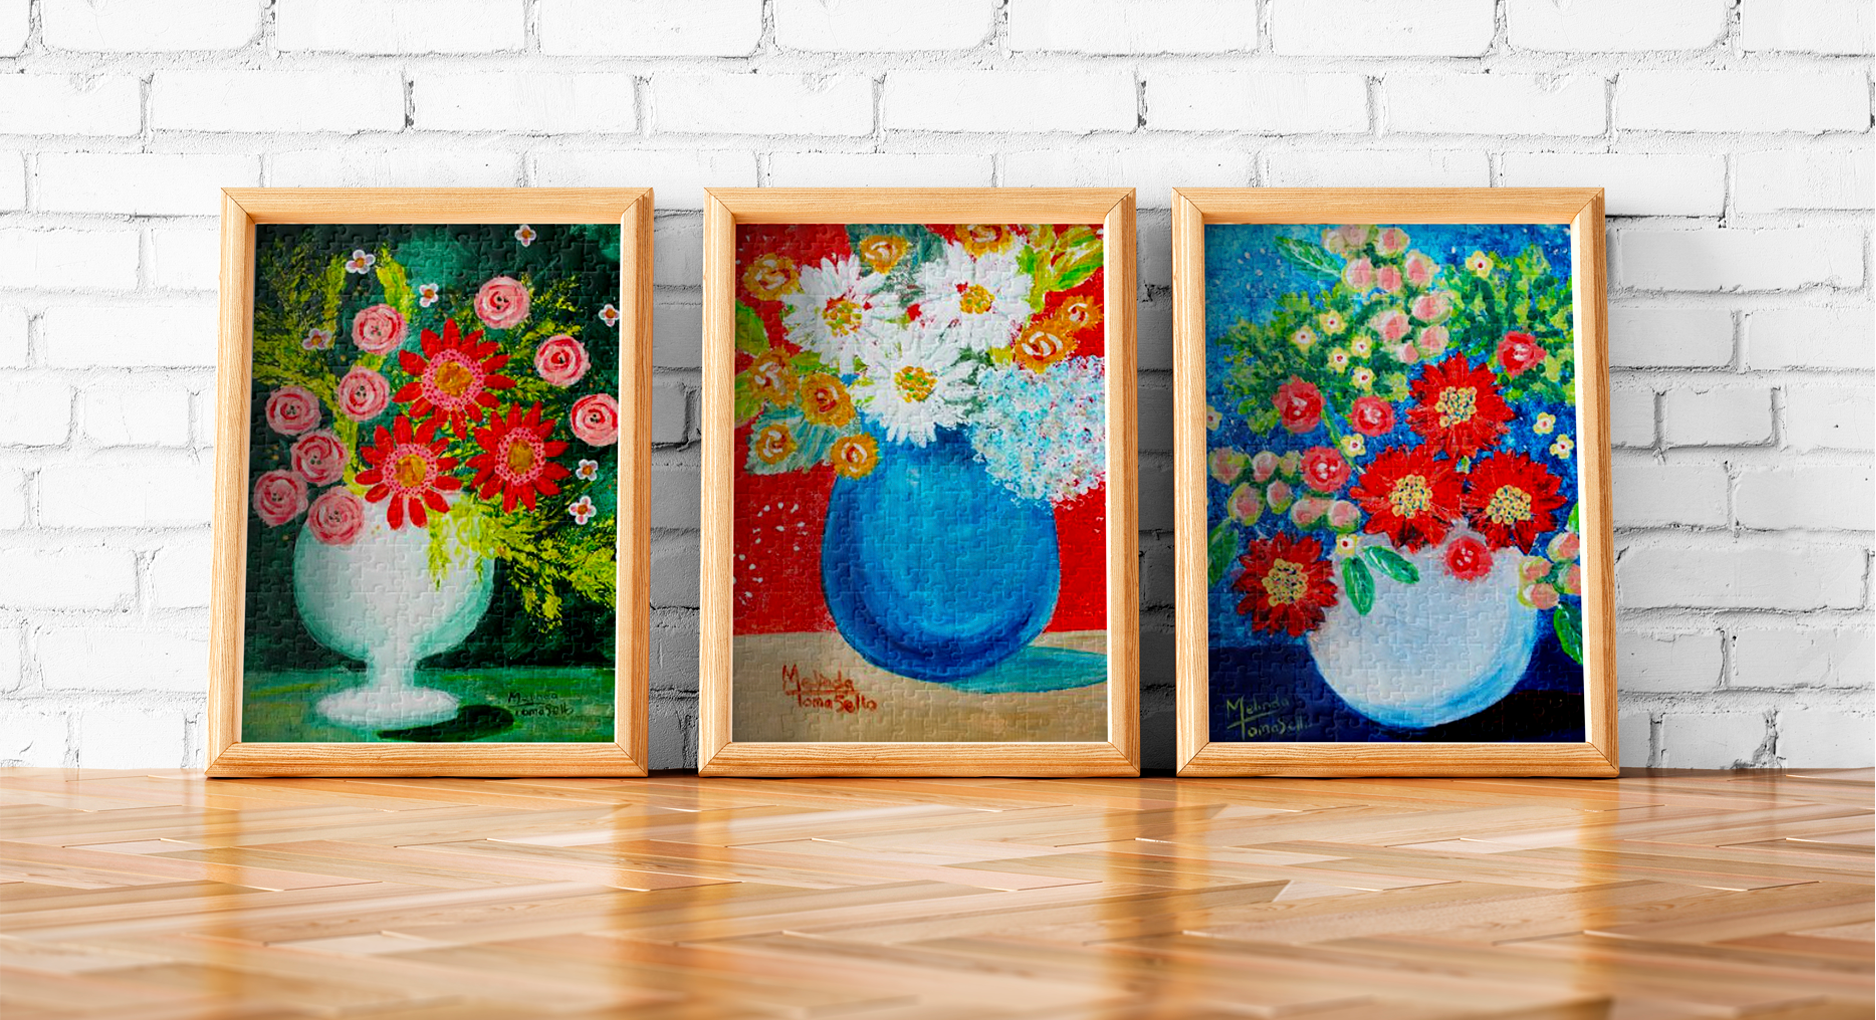 Melinda Tomasello art impressionistic colorful floral painting gallery ensemble